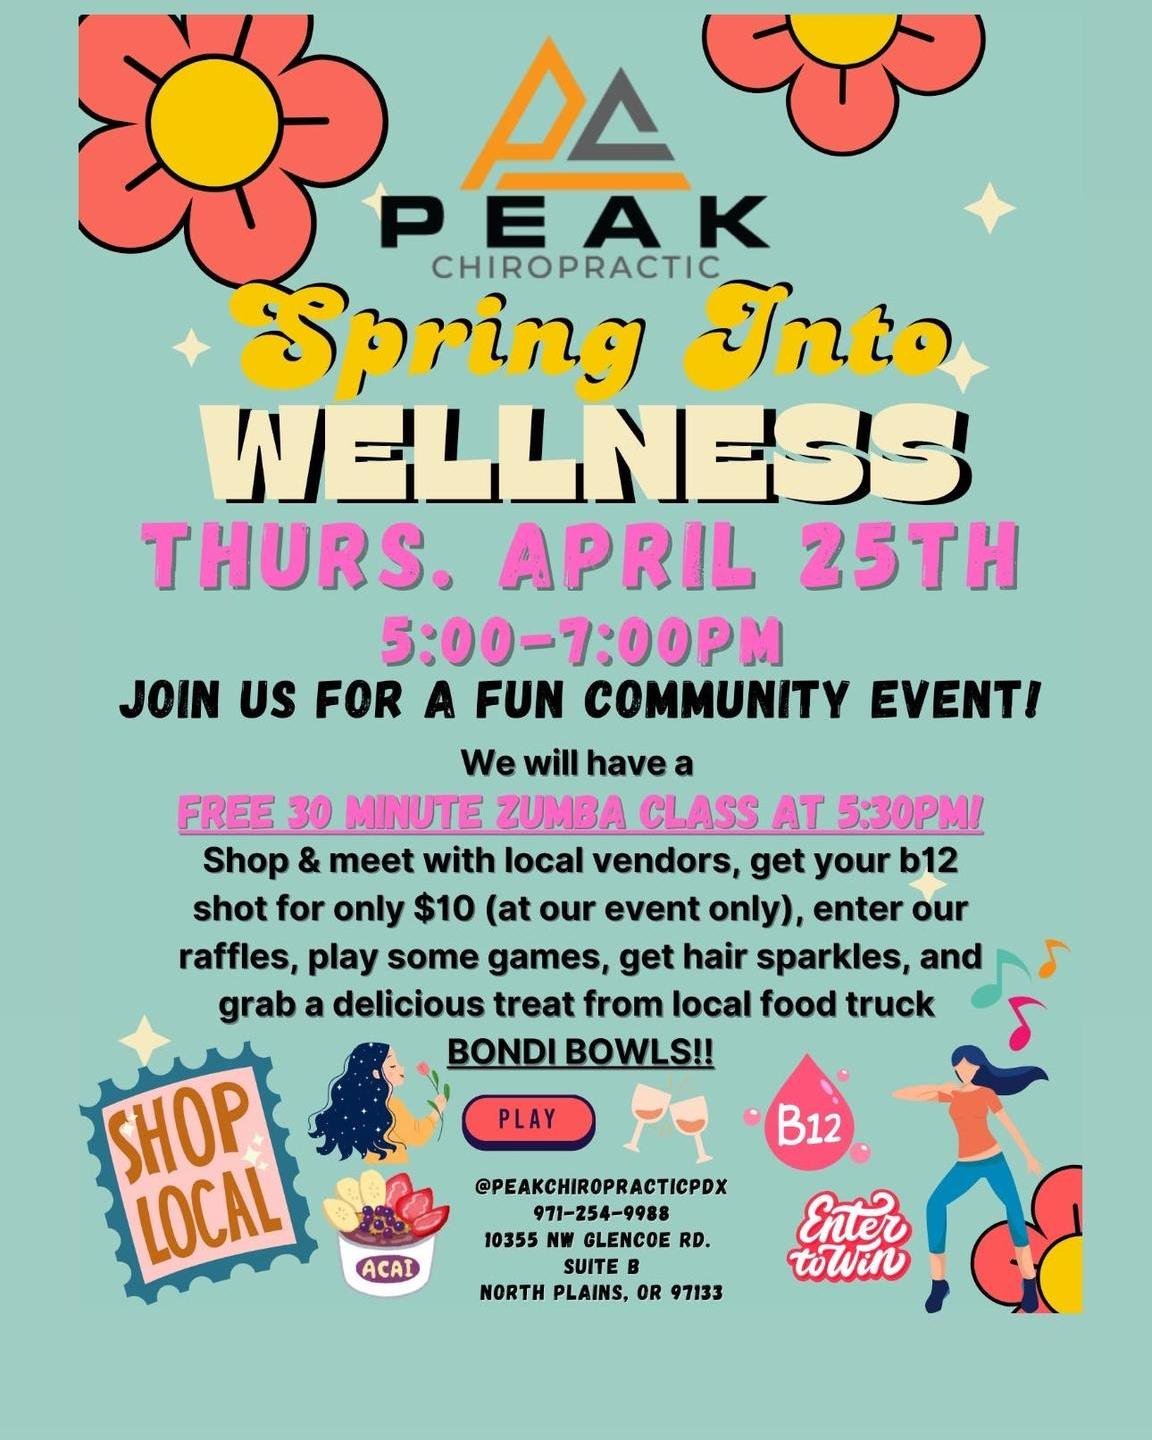 Join us at Peak Chiropractic on Thursday, April 25th from 5pm-7pm for Spring into Wellness